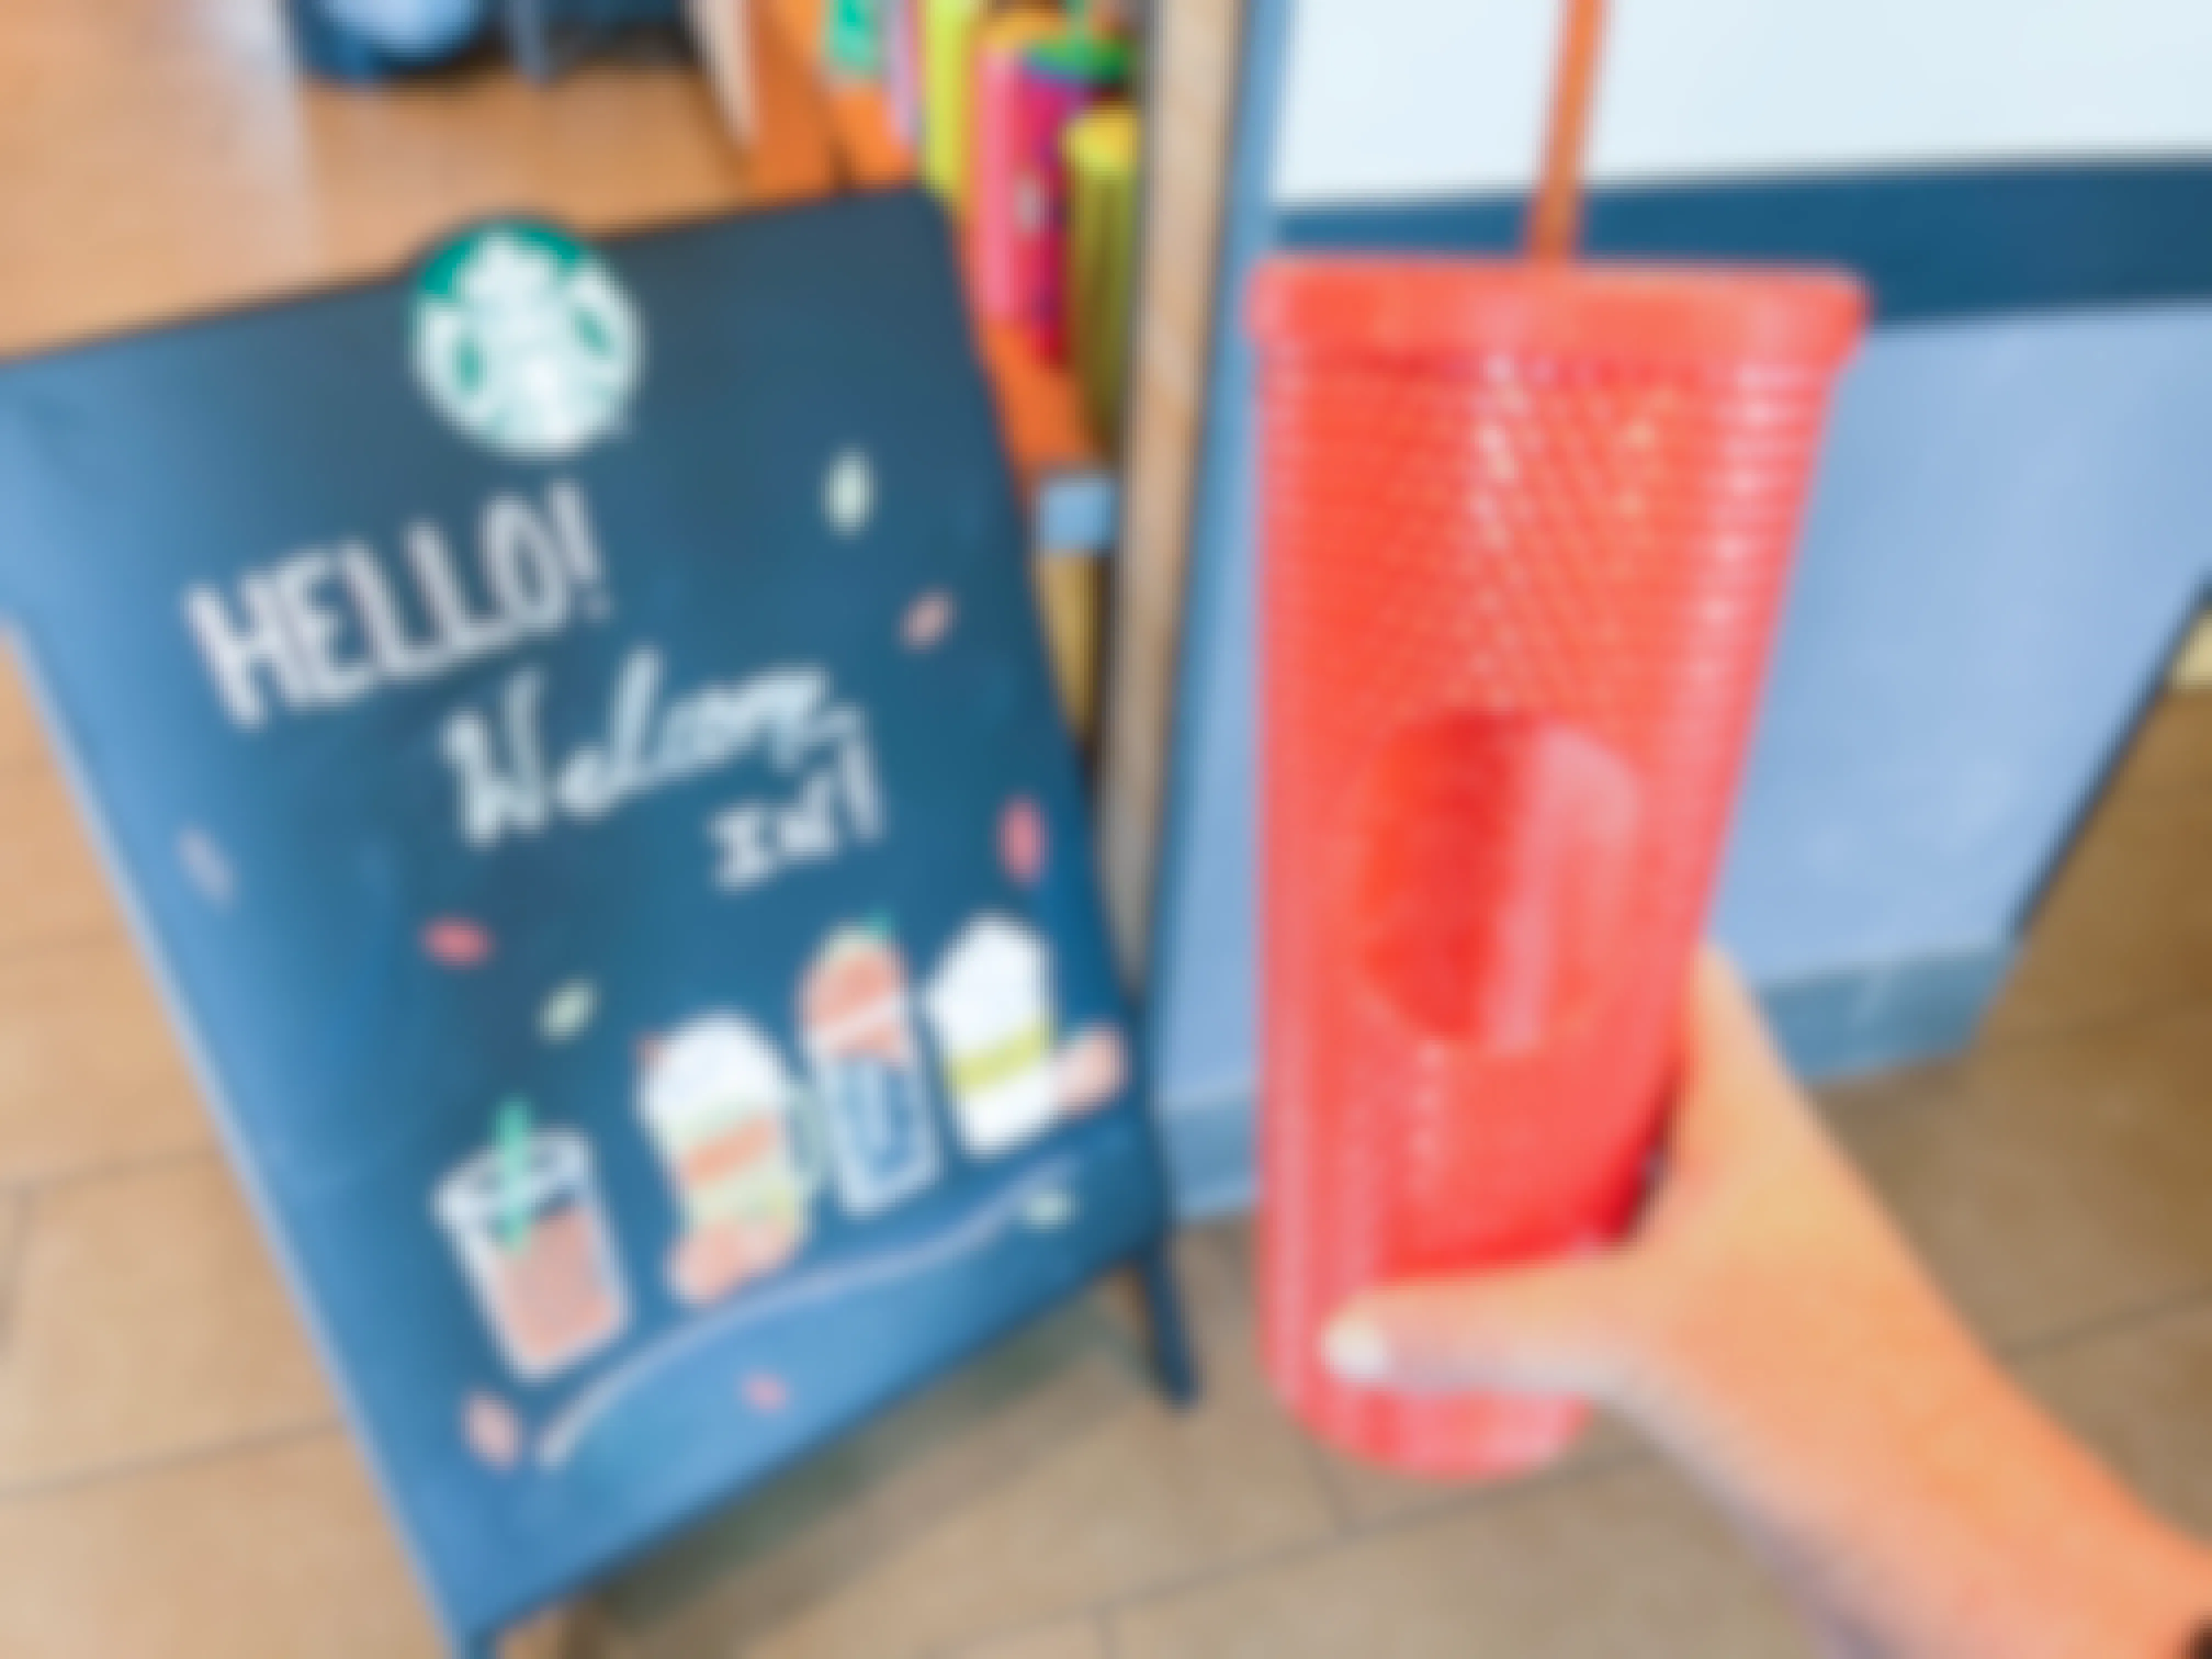 A person holding up a reusable Starbucks cup near a "welcome in" sign.